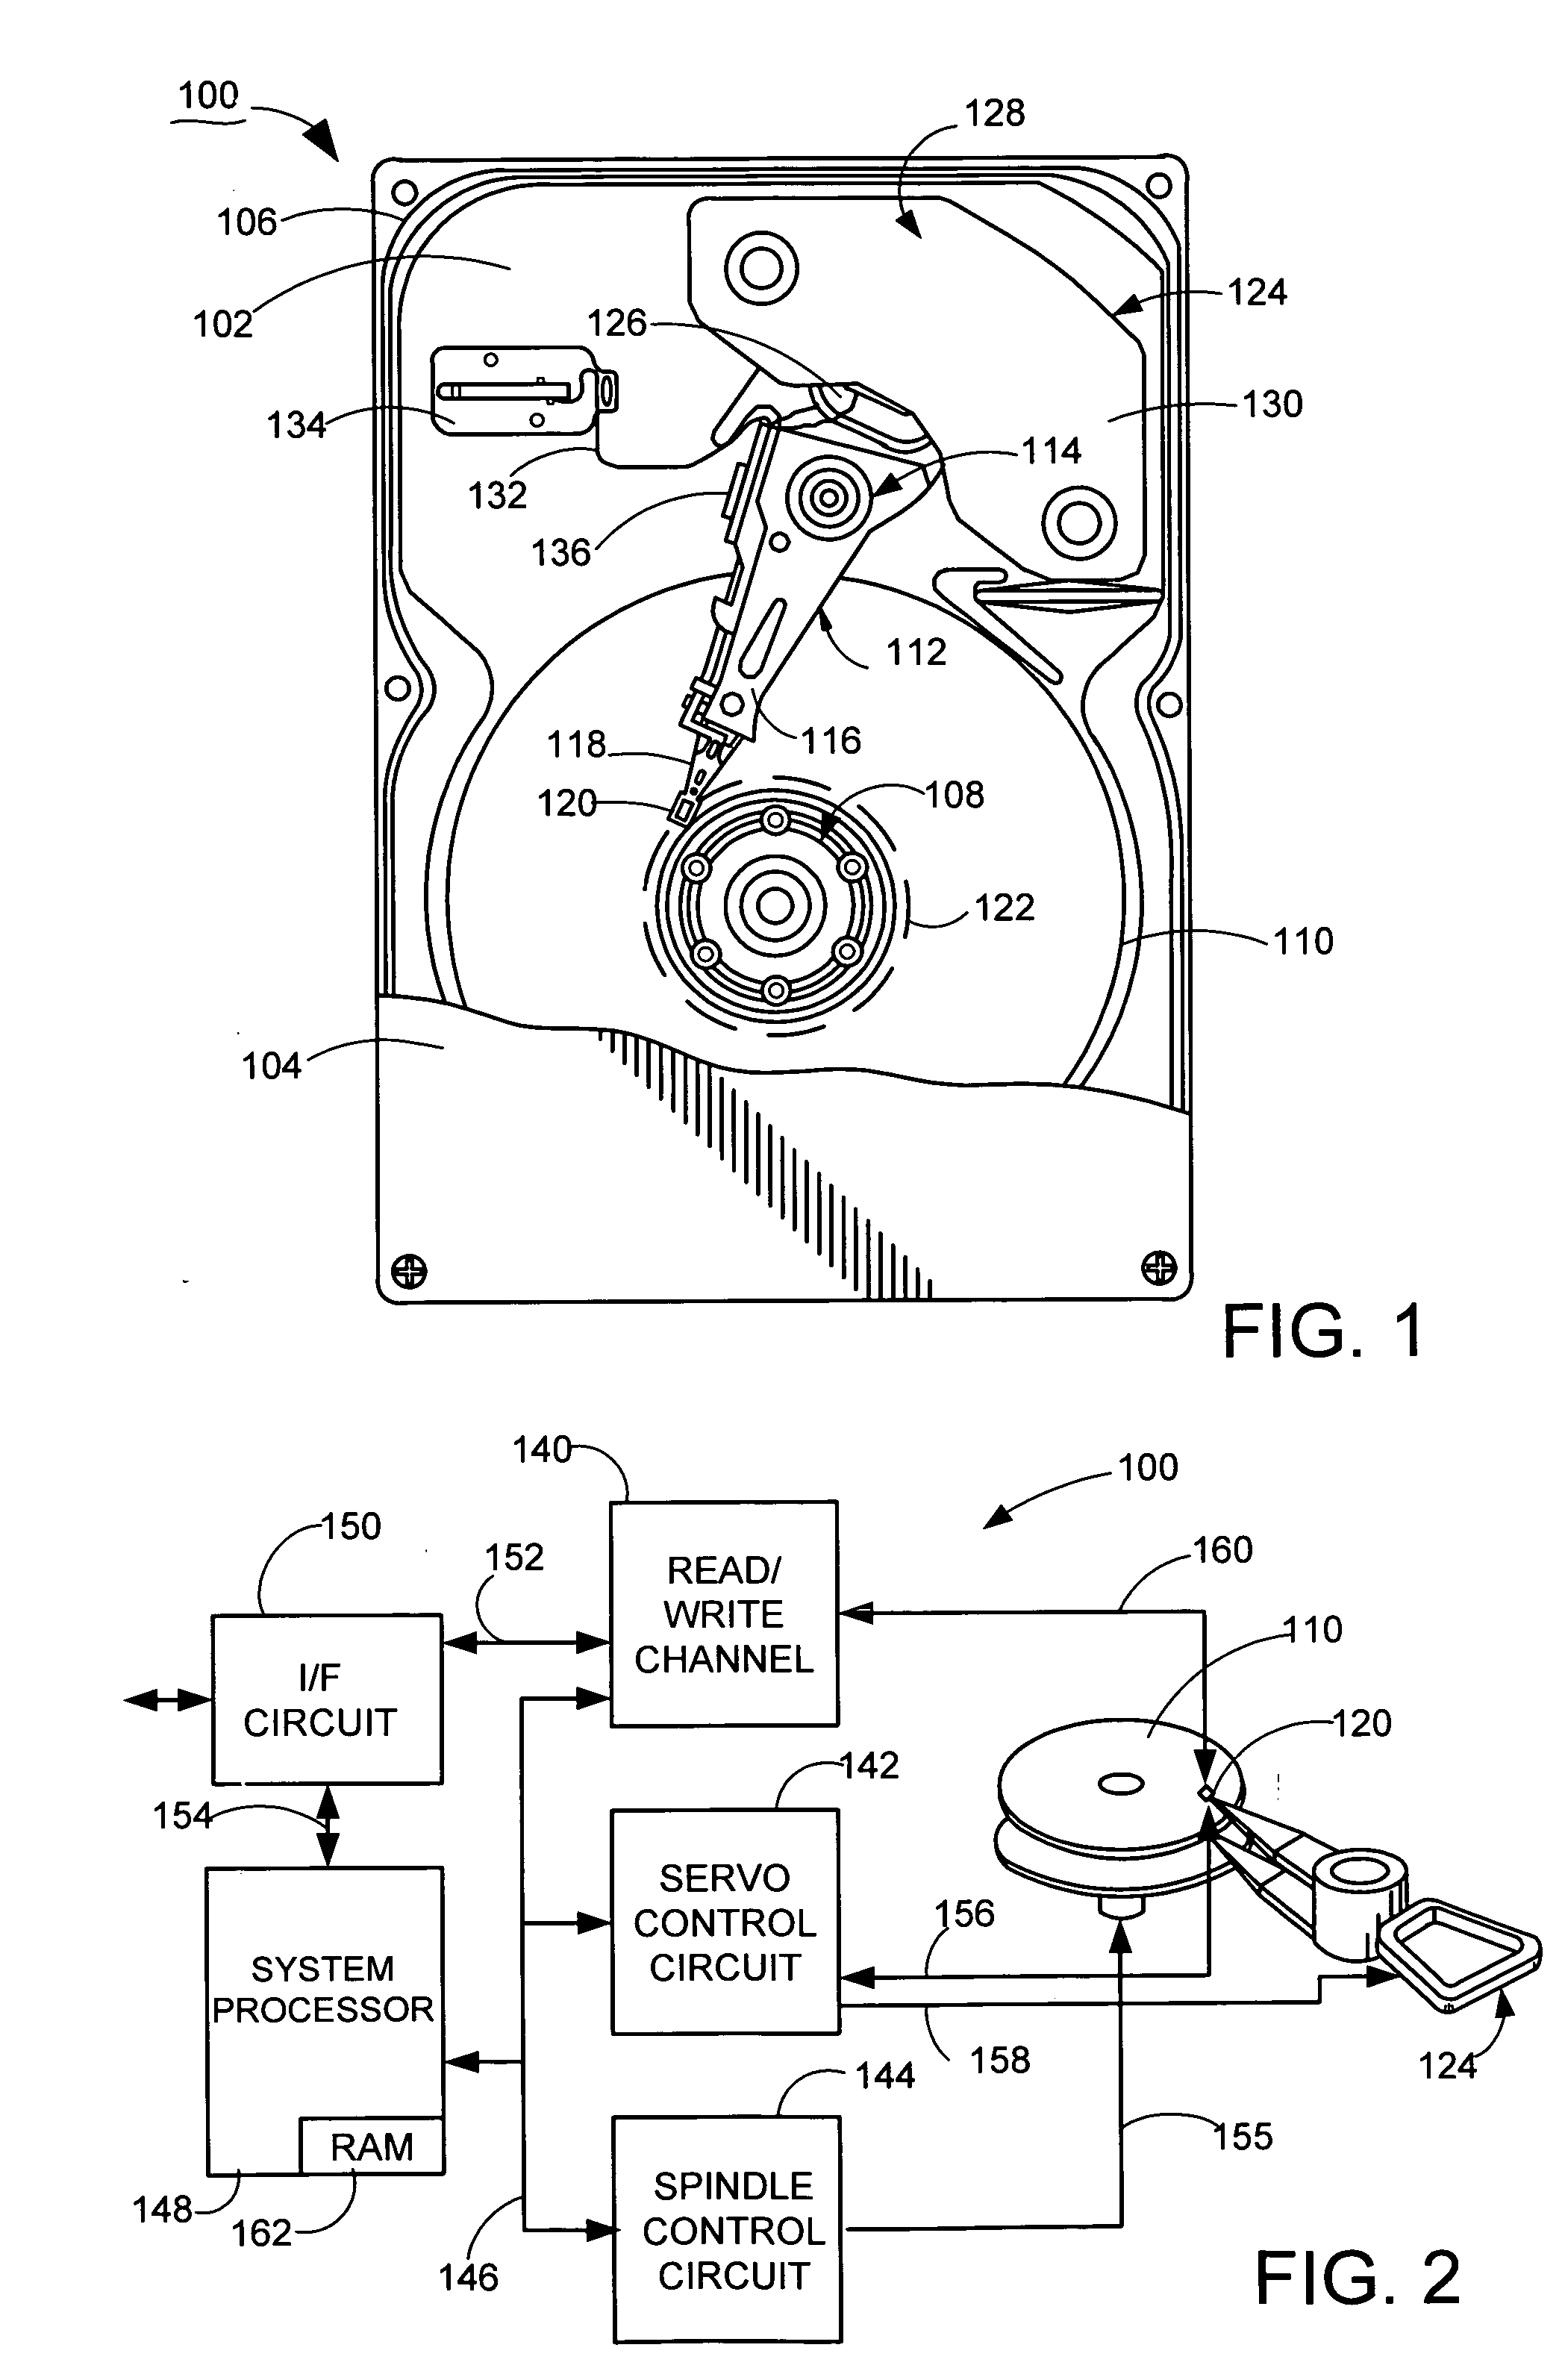 Adaptive voltage-mode controller for a voice coil motor